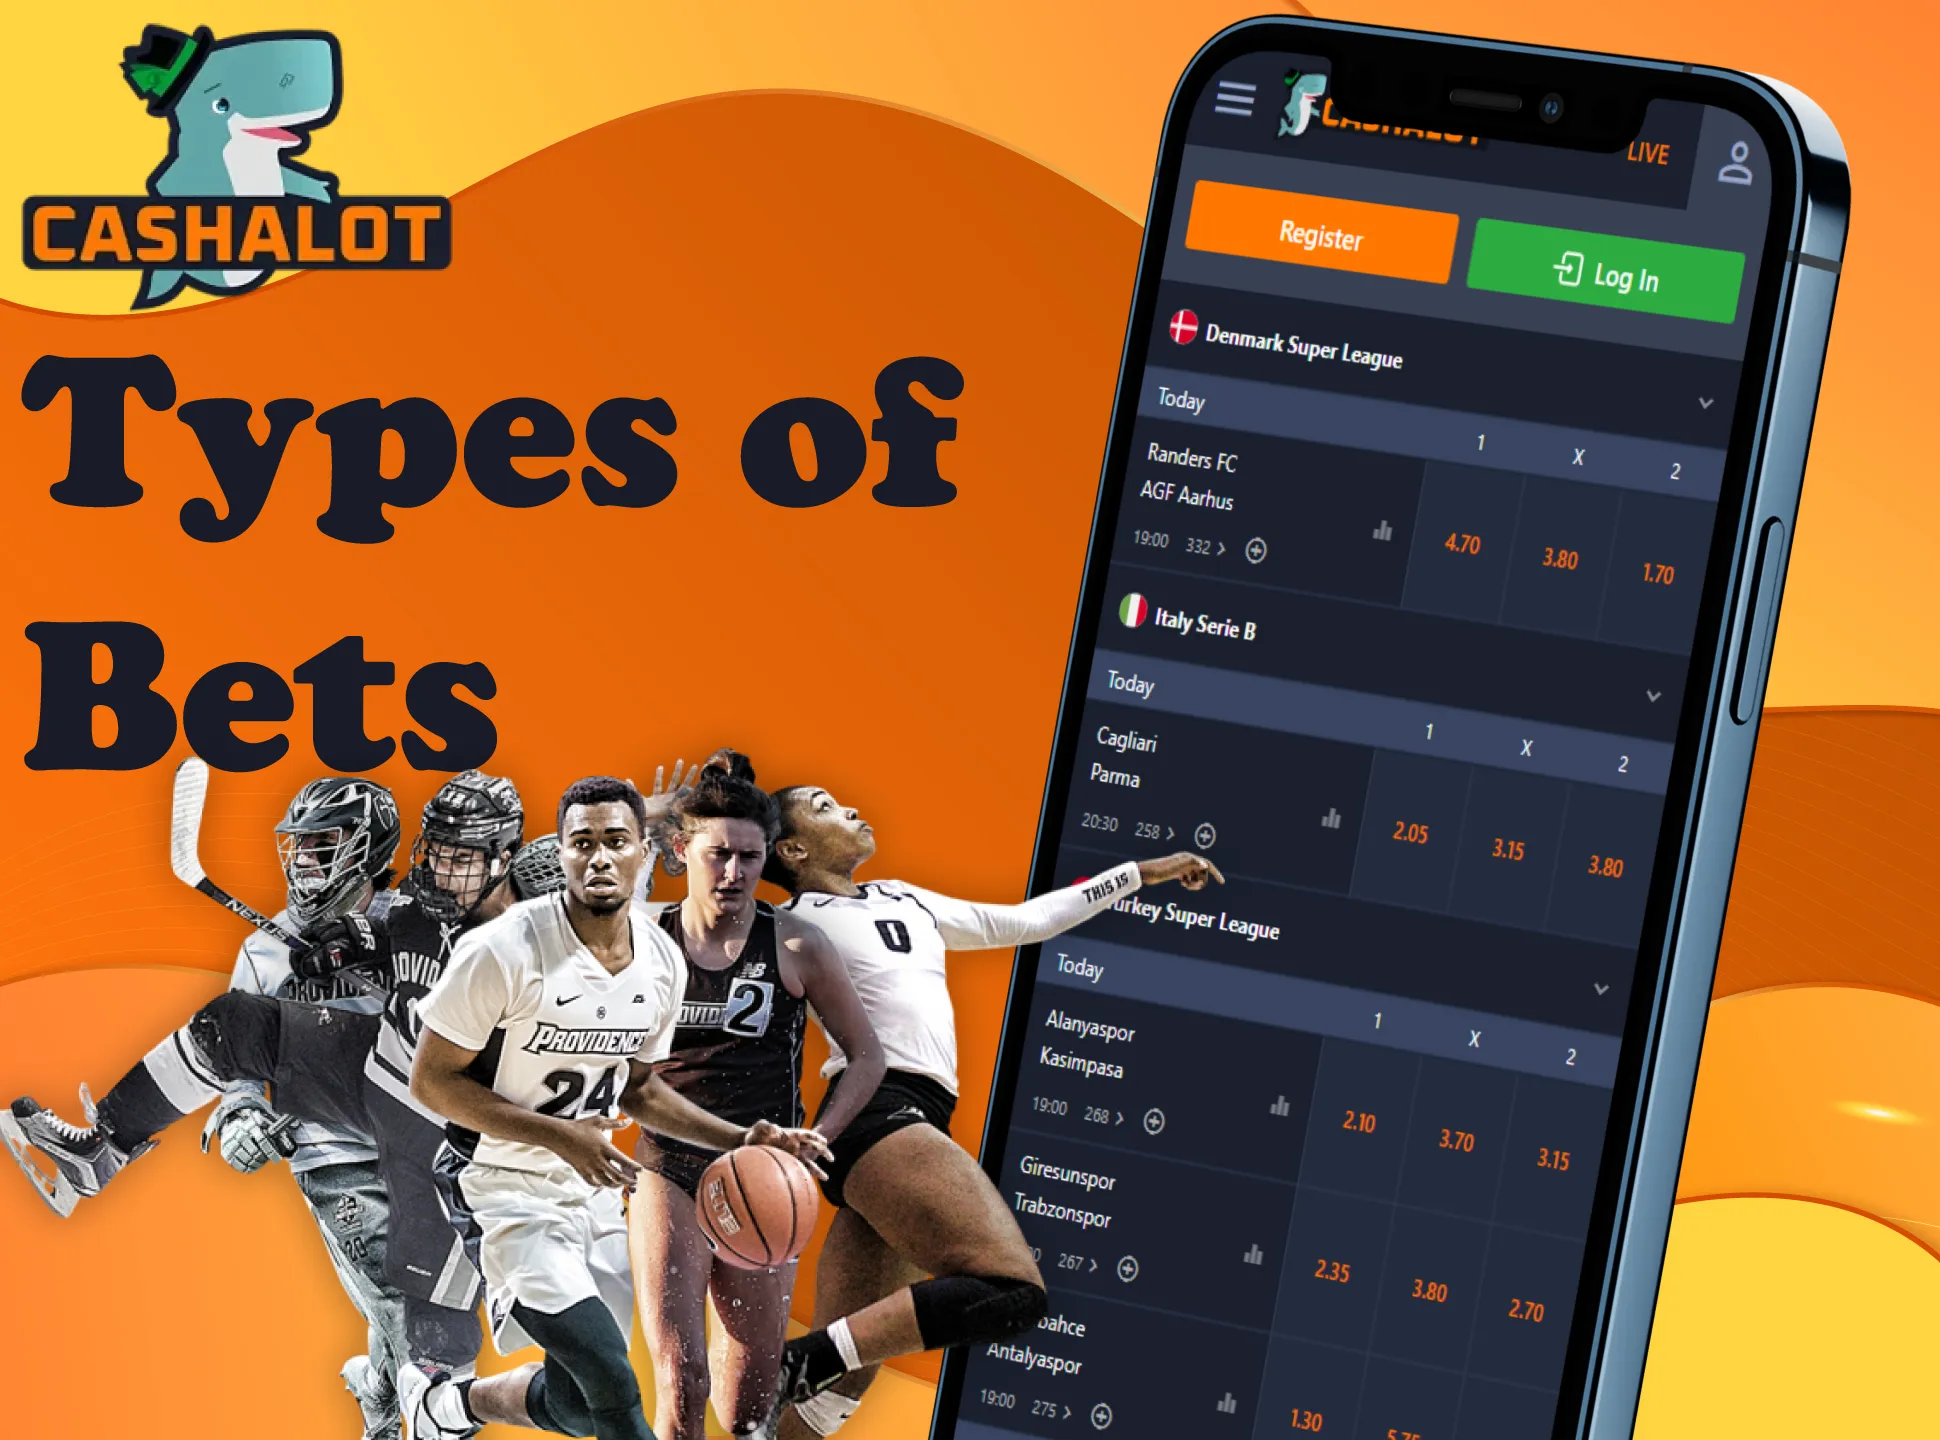 Learn more about different types of bets in the Cashalot app.